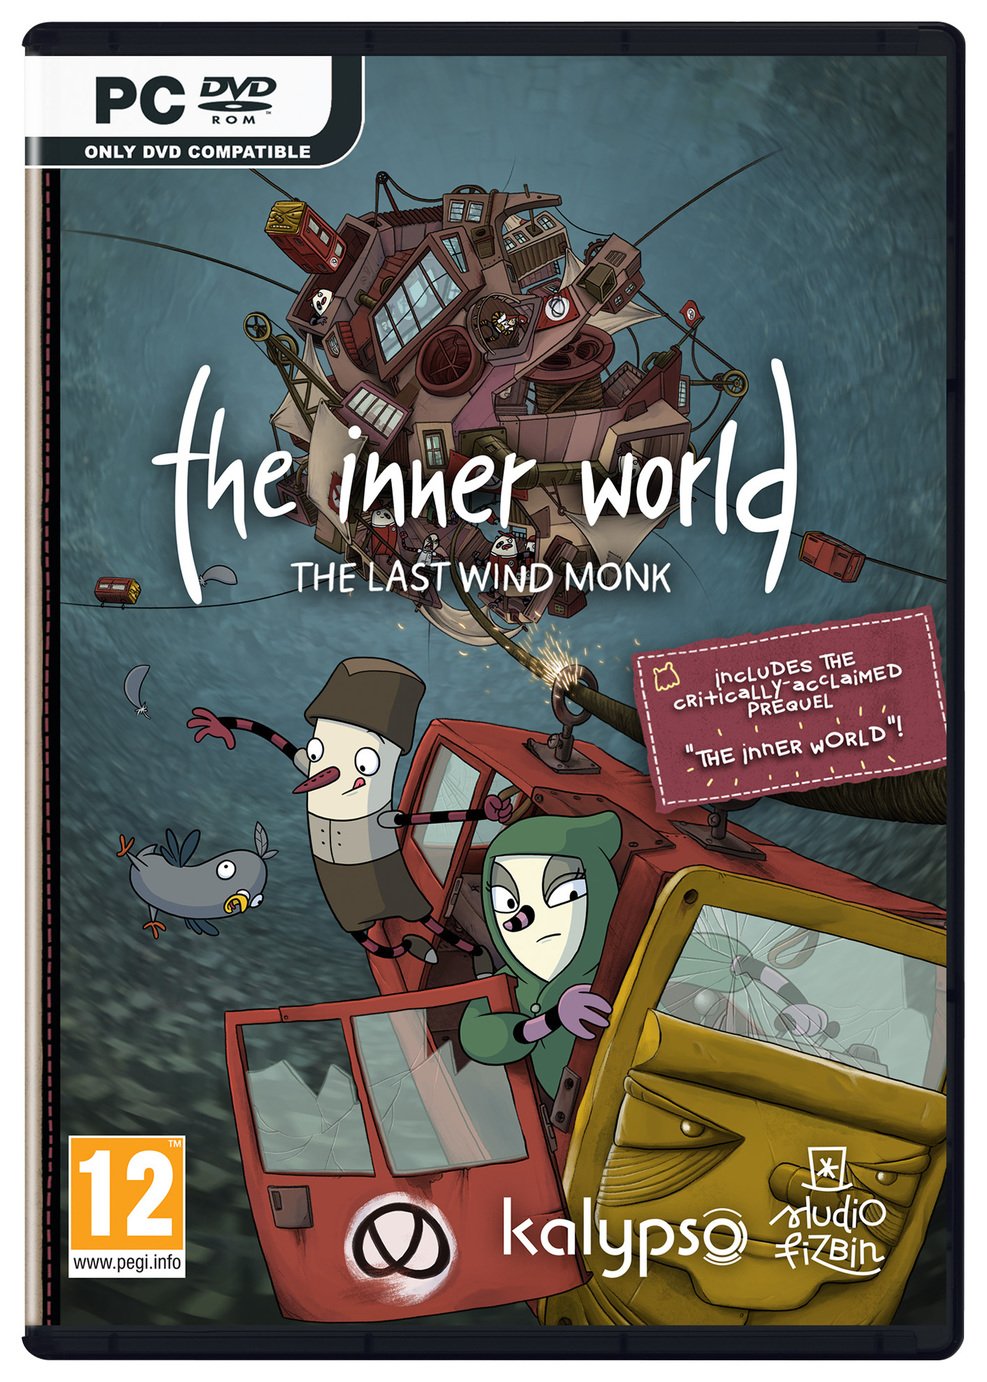 The Inner World - The Last Wind Monk PC Game